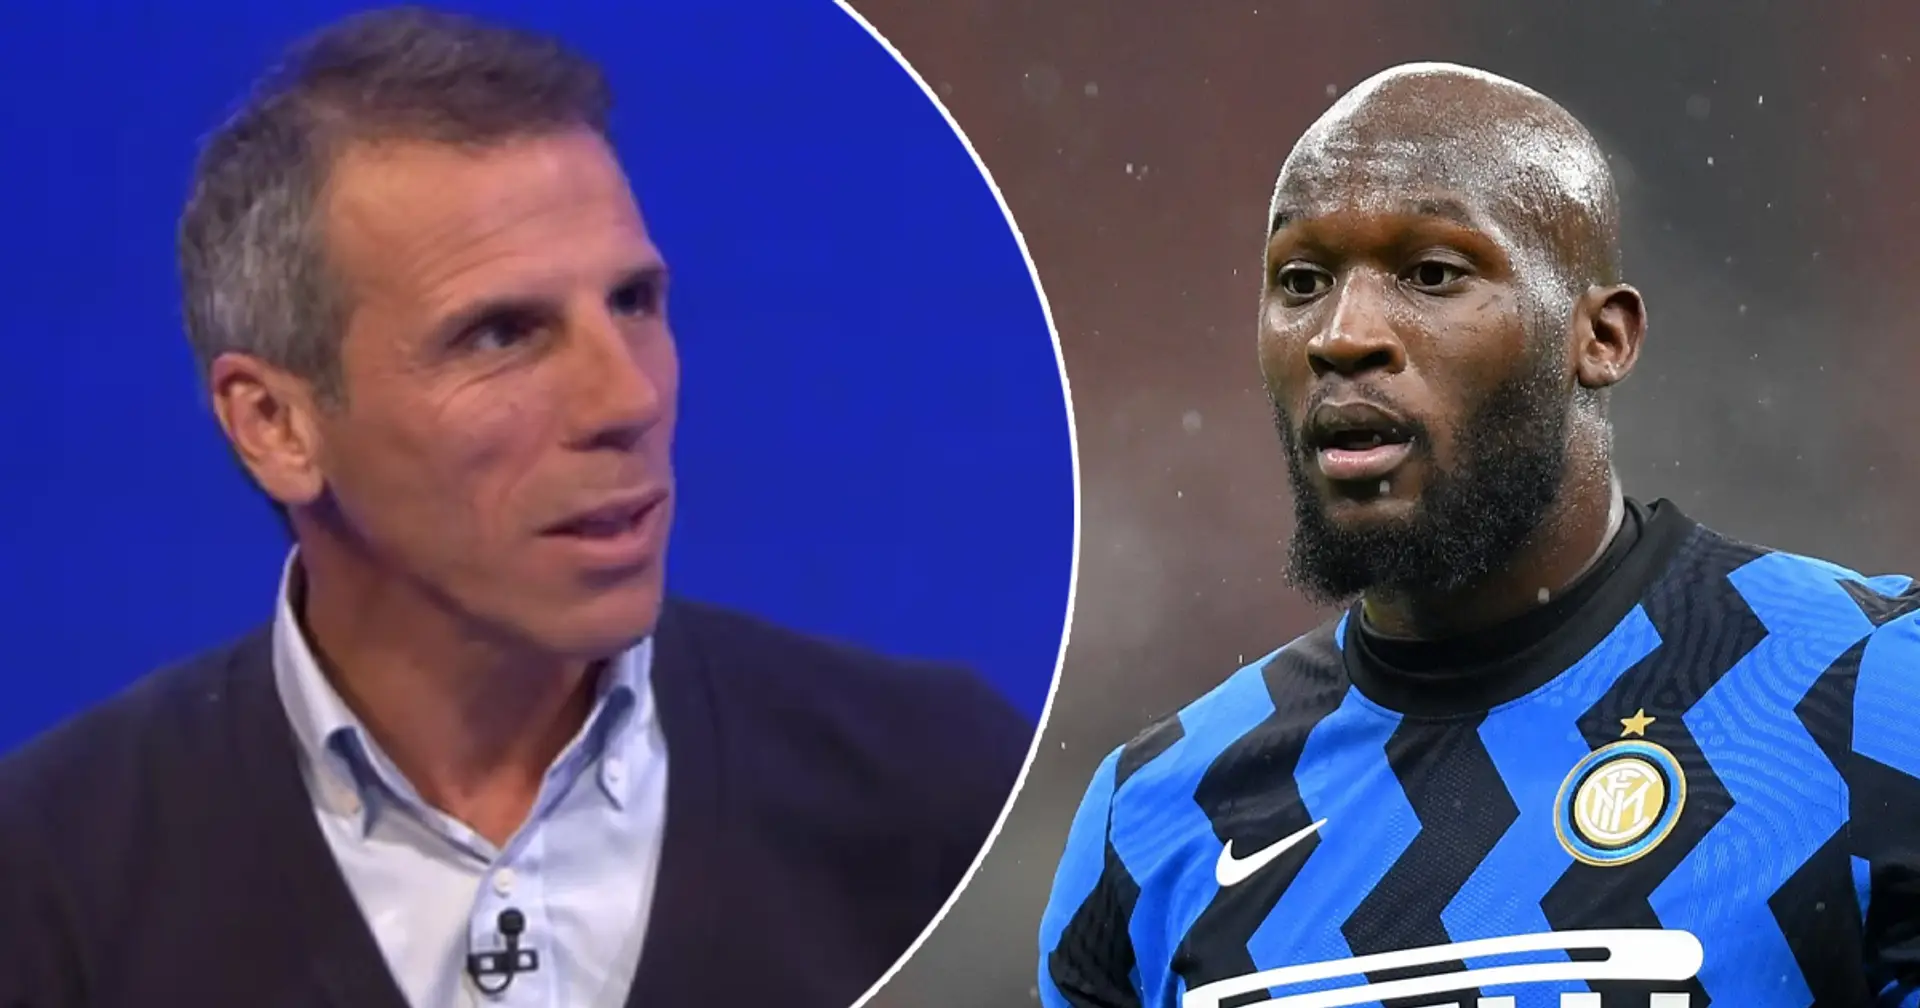 'I liked Chelsea the way they were': Gianfranco Zola names one player he's worried about if Lukaku arrives